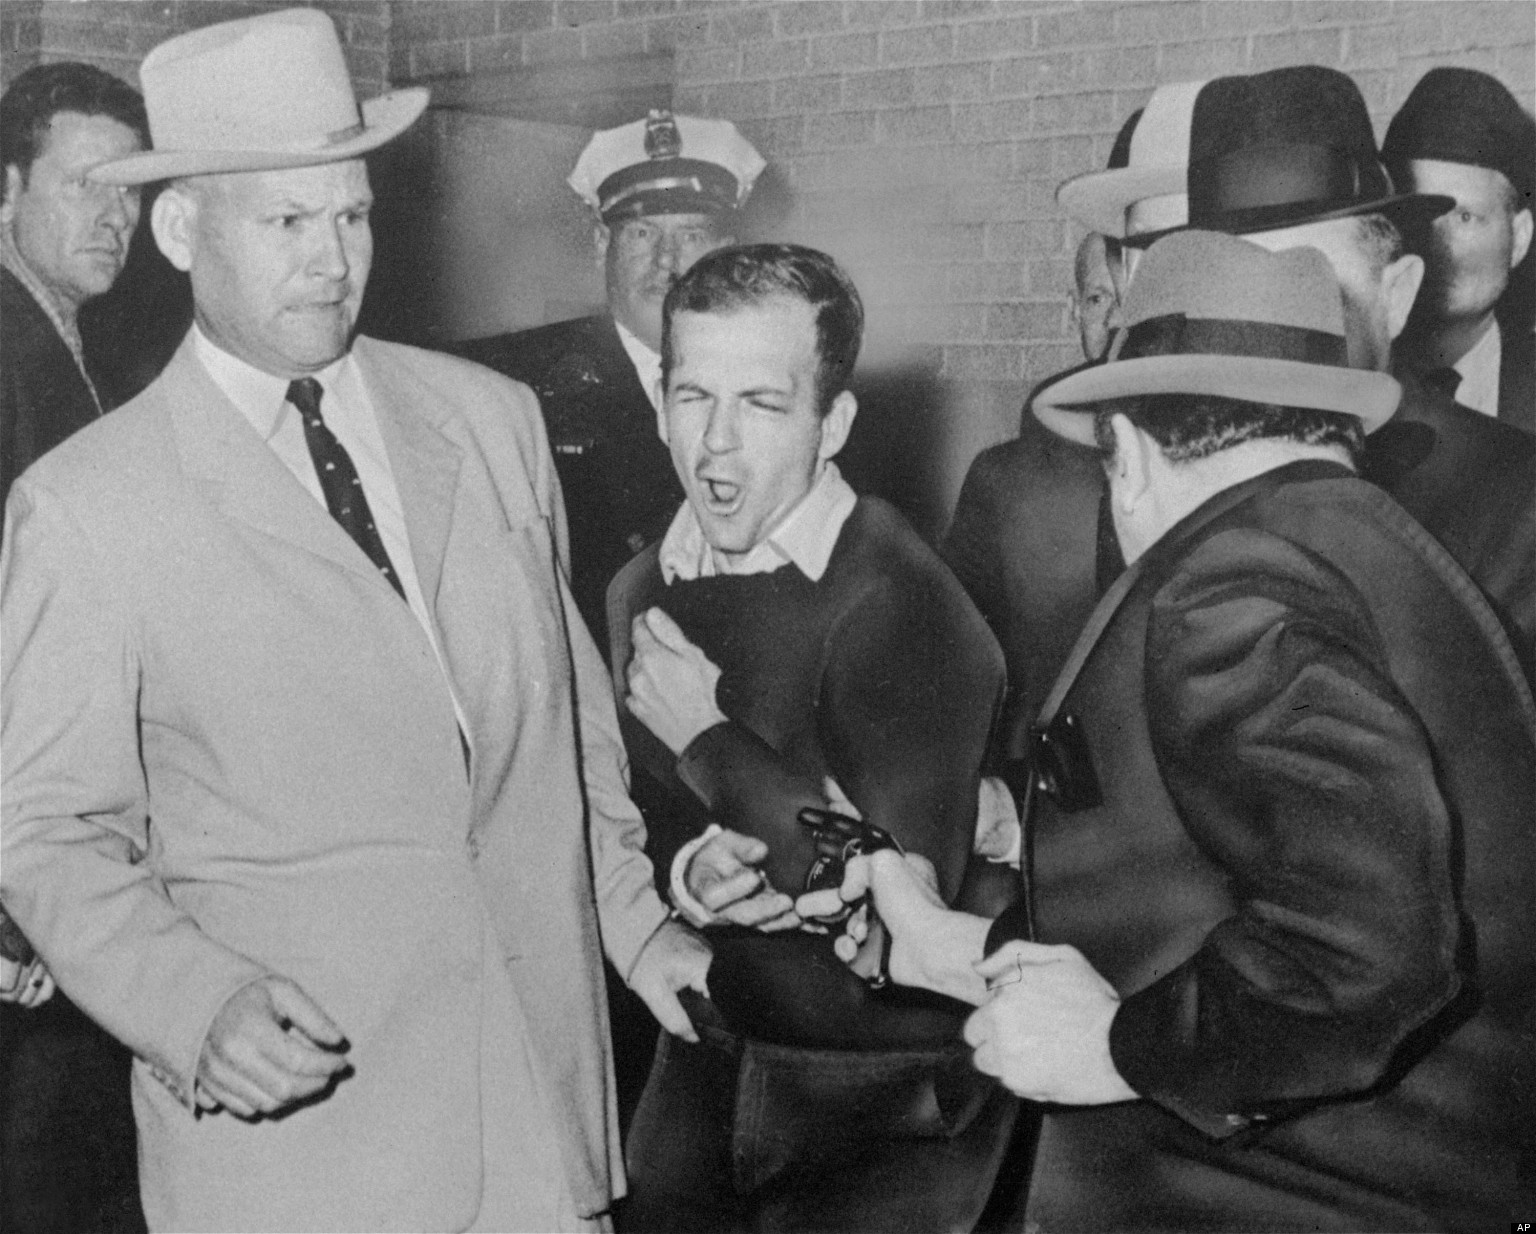 History's most famous "perp walk"